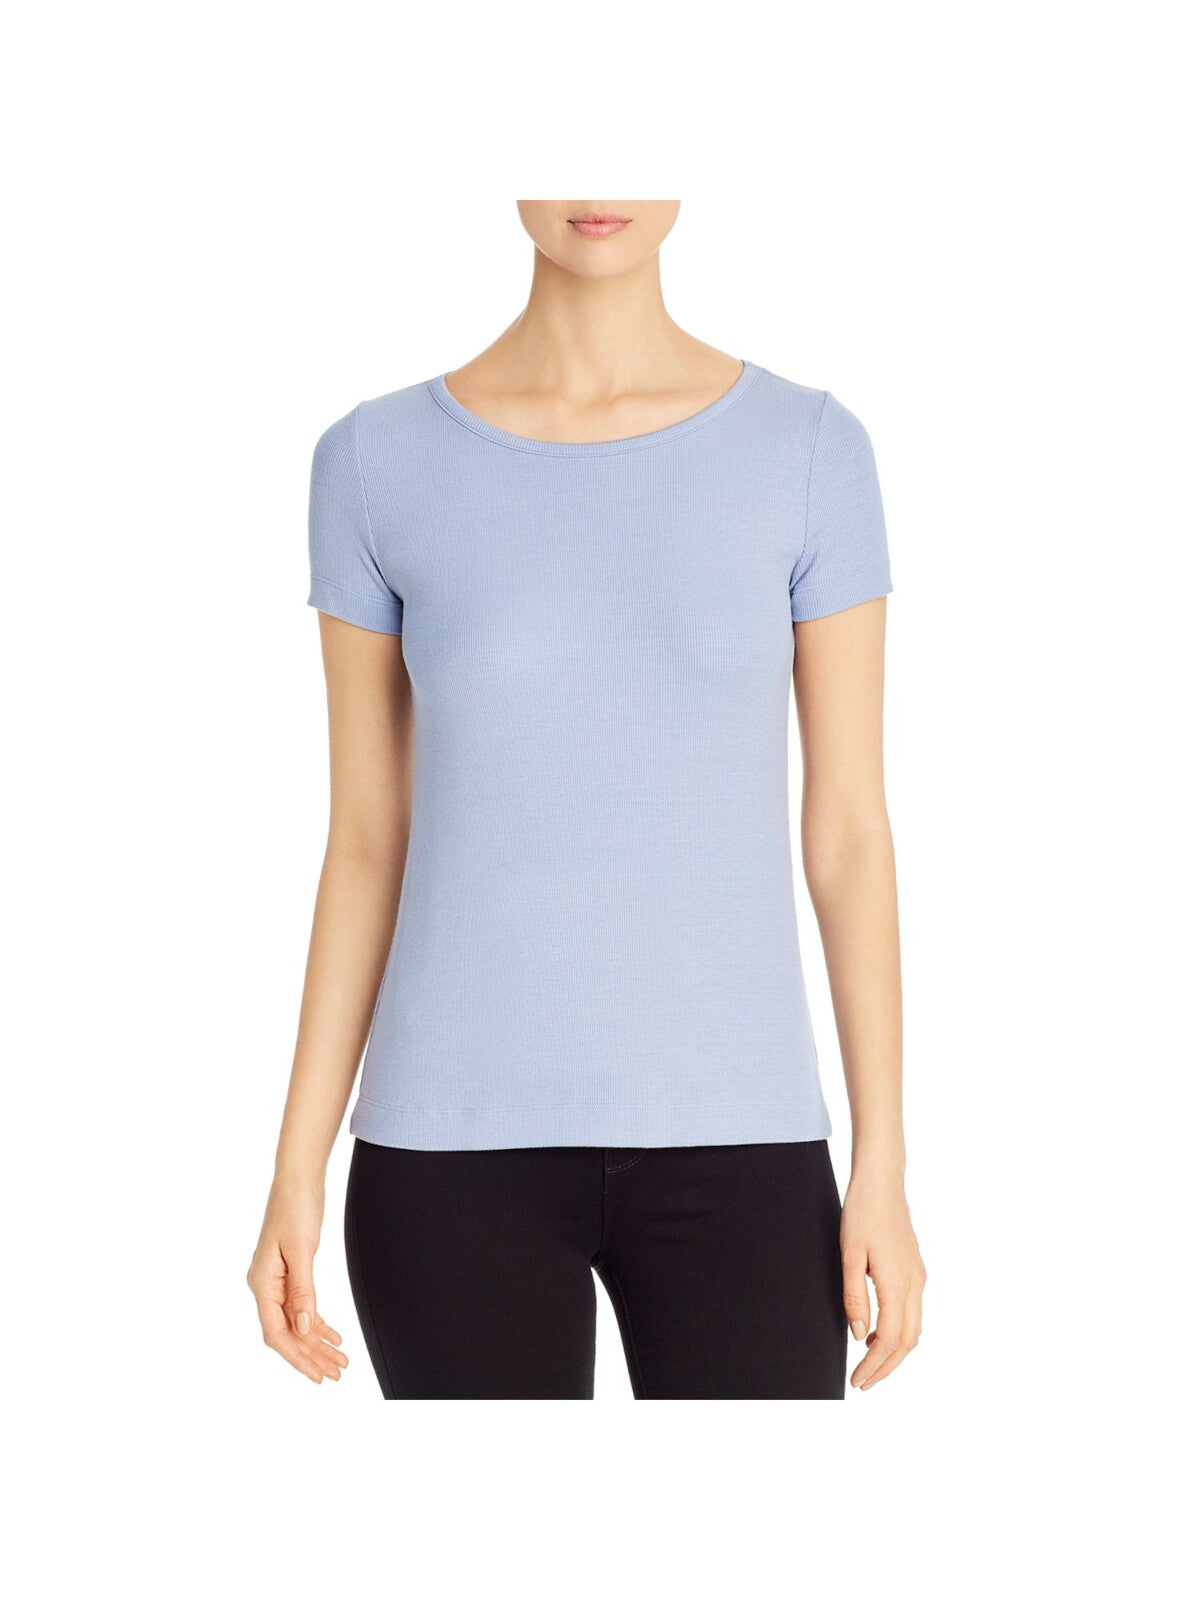 THREE DOTS Womens Blue Stretch Ribbed Semi-fitted Short Sleeve Scoop Neck T-Shirt M